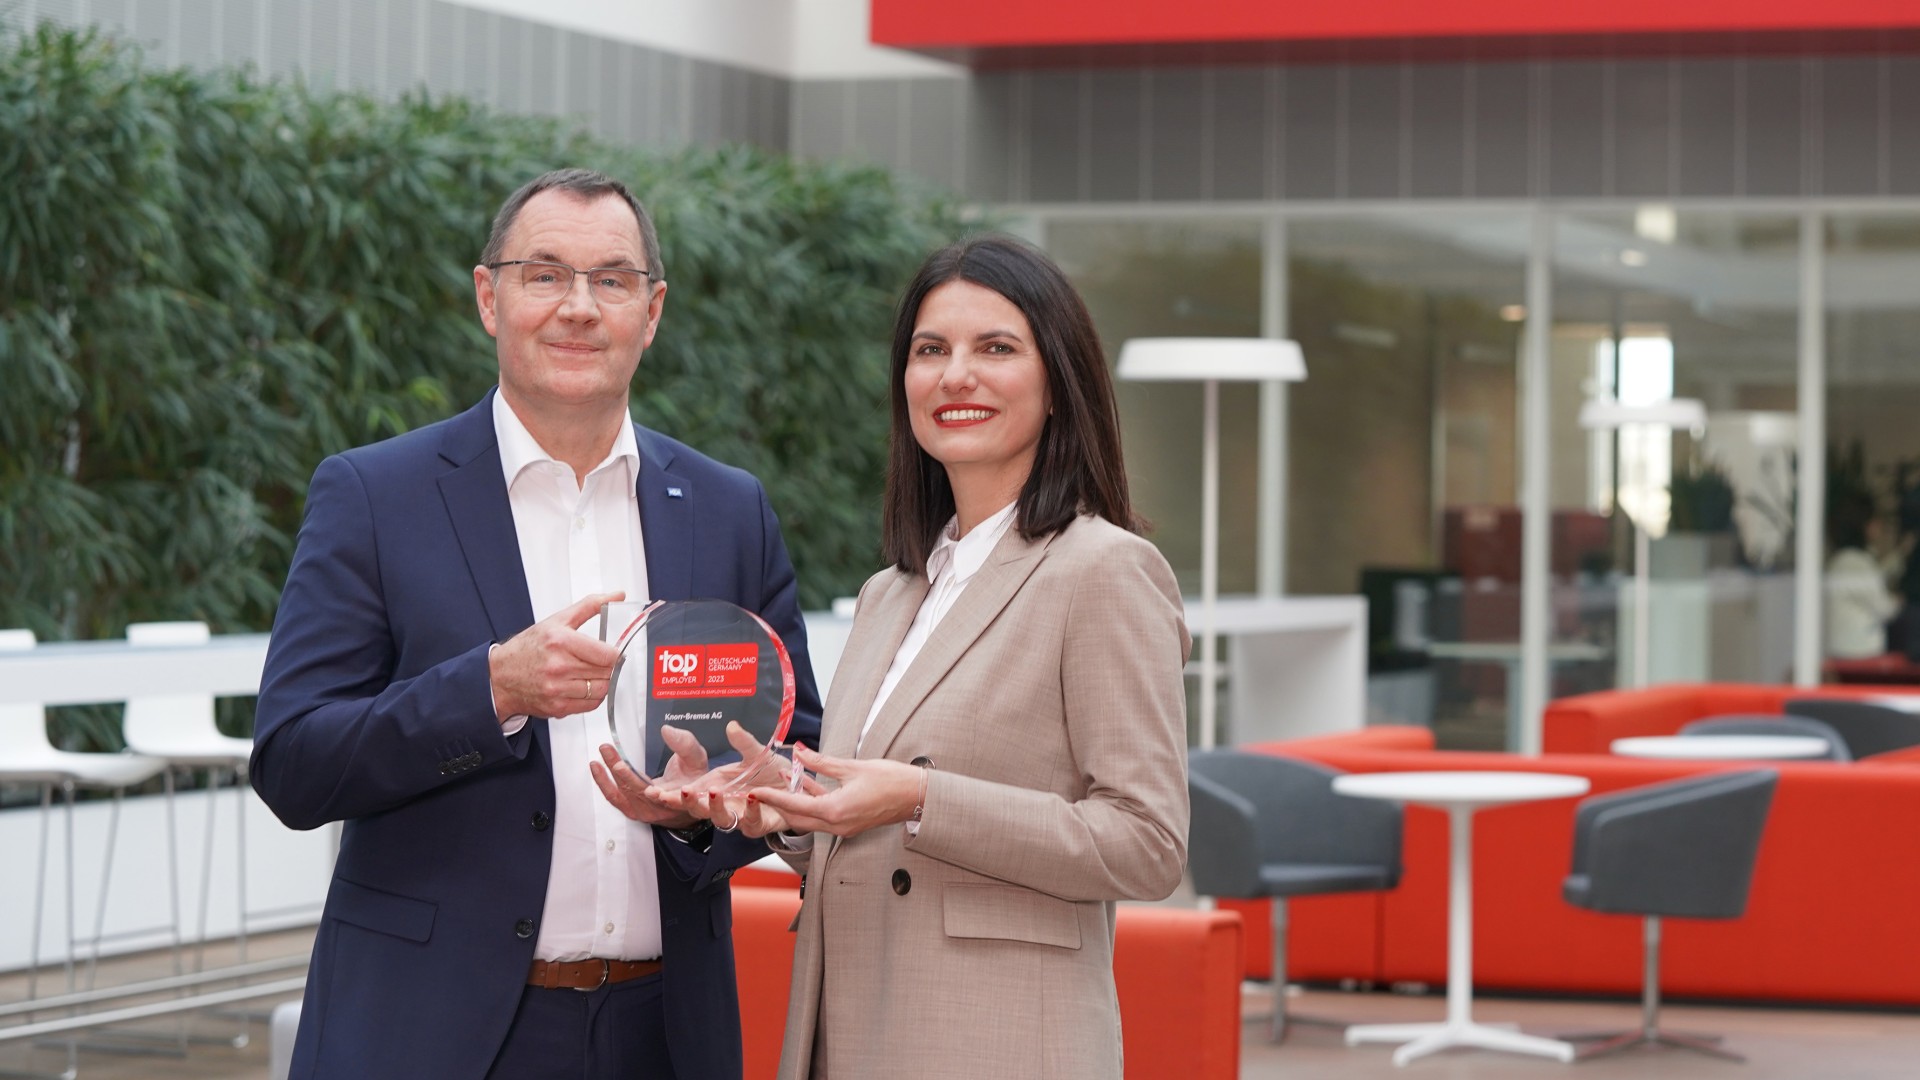 Klaus Remmler, Senior Vice President Corporate HR at Knorr-Bremse AG, and Berna Tulga-Akcan, HR Specialist University Marketing, jointly hold the Top Employer Award in their hands.